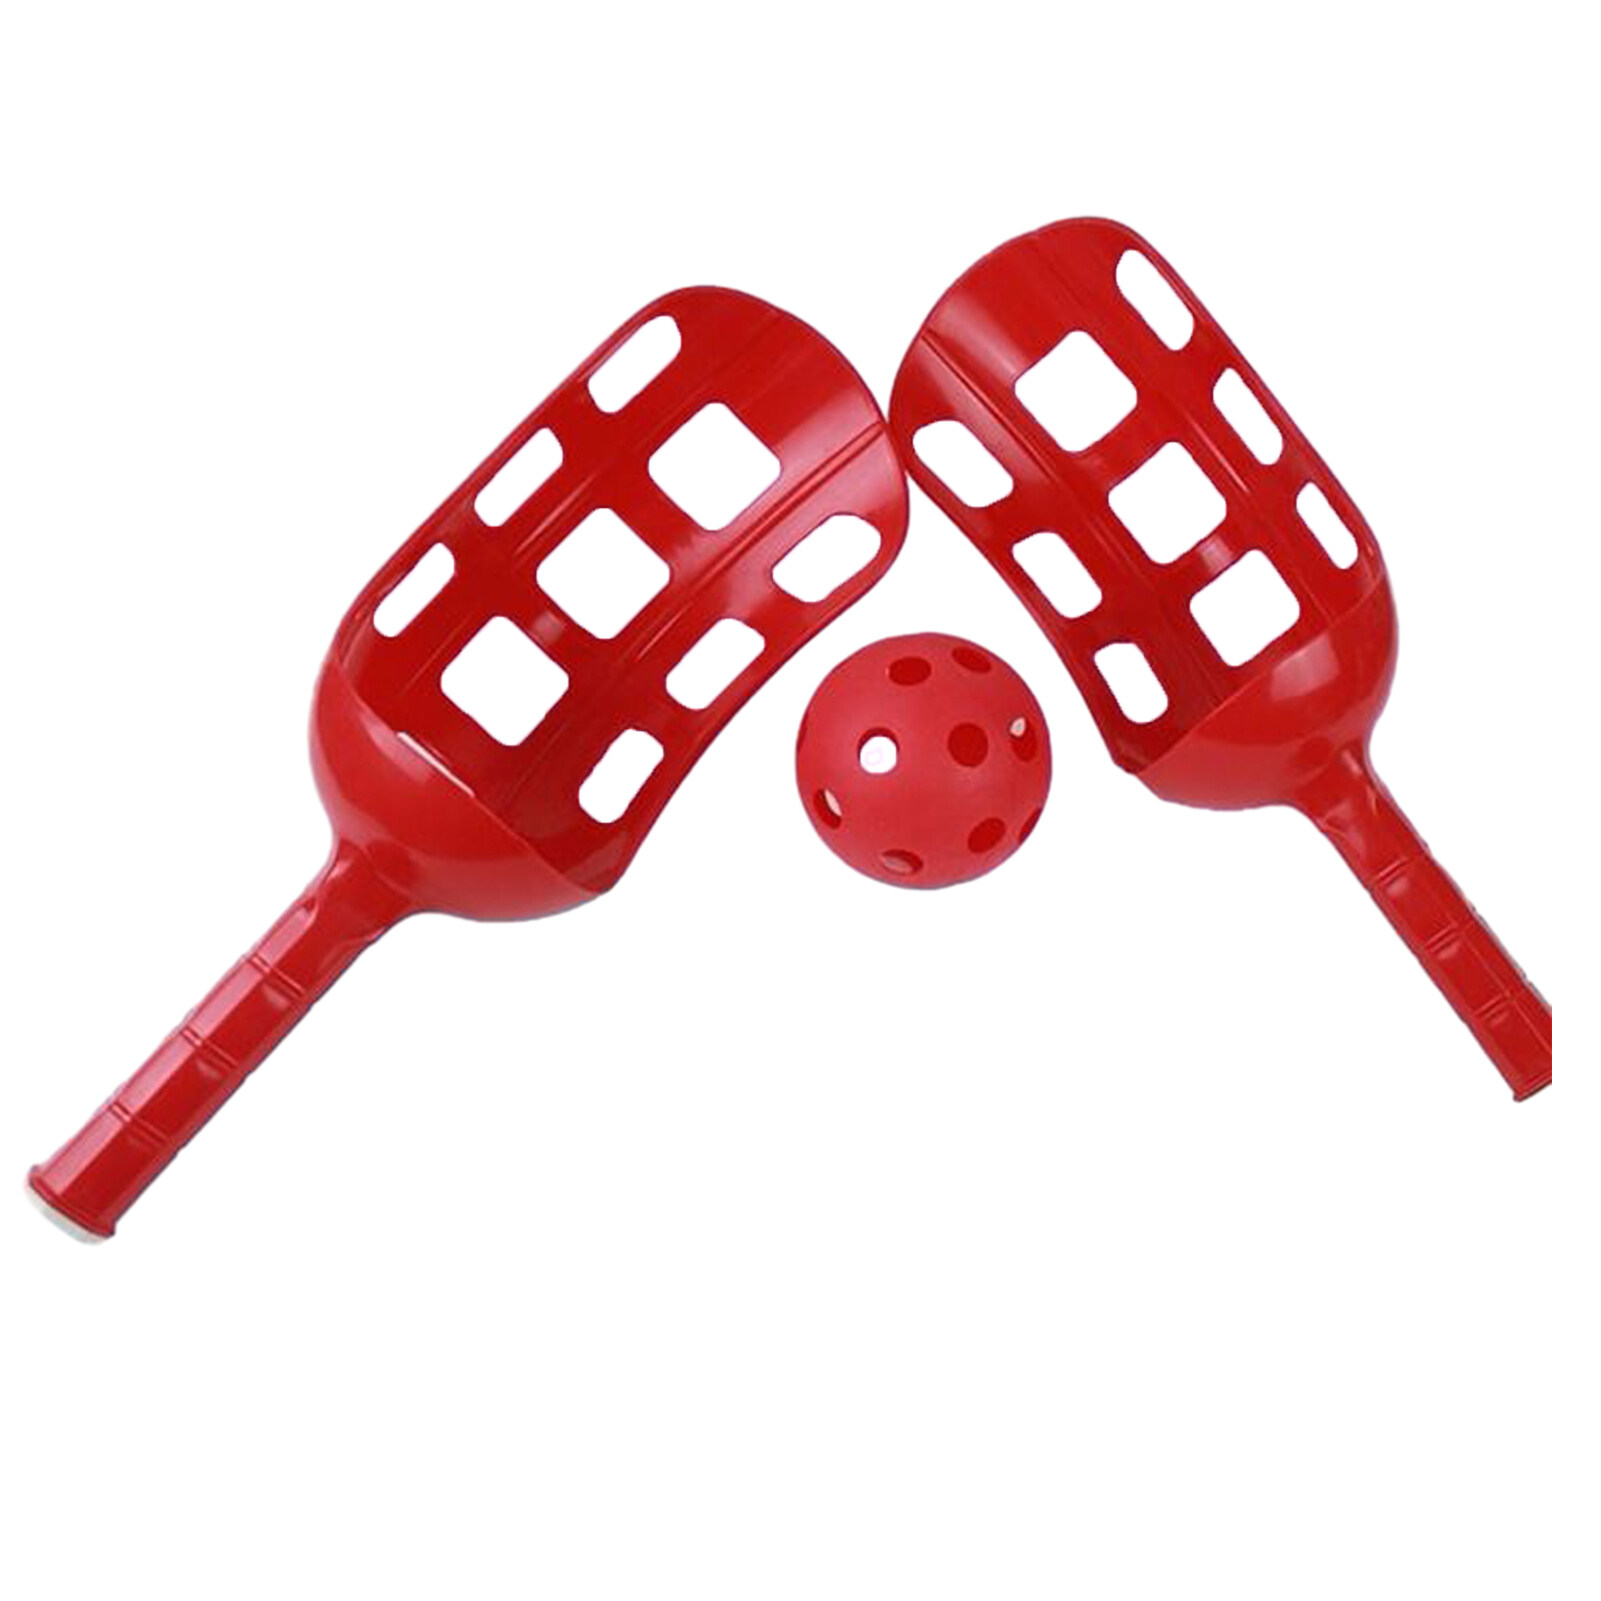 UHH Educational Toys for All Difficulty Levels Throwing Ball Toy Fun